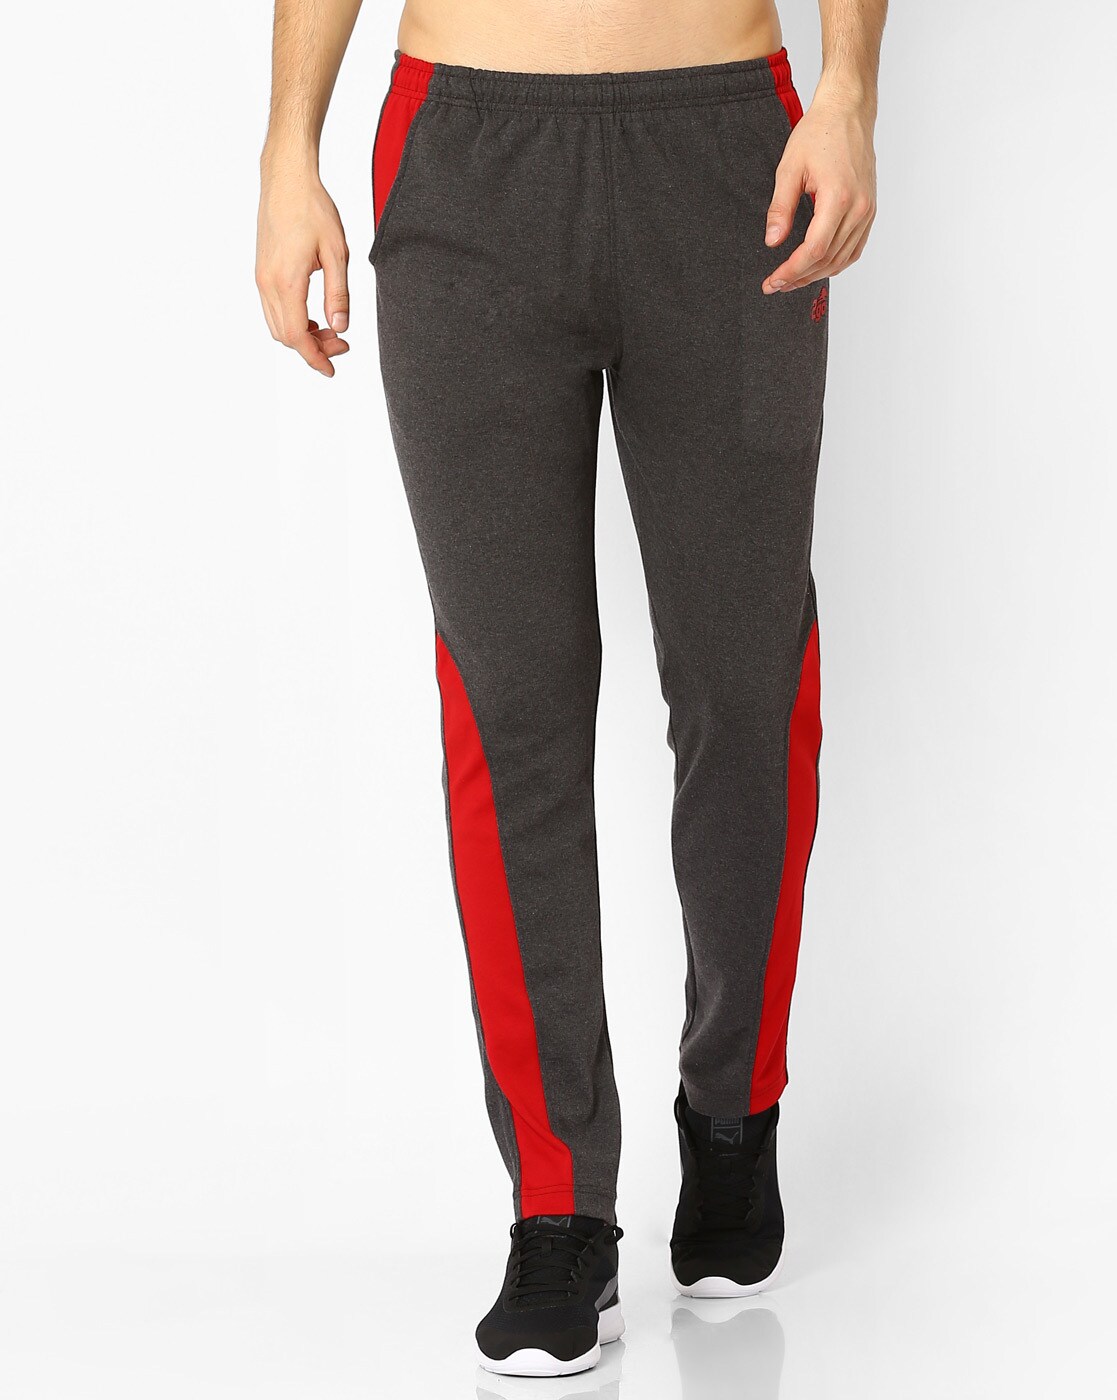 Buy Regular Fit Cotton Black Lounge Pants for Women with Pockets online in  India - Cupidclothings – Cupid Clothings